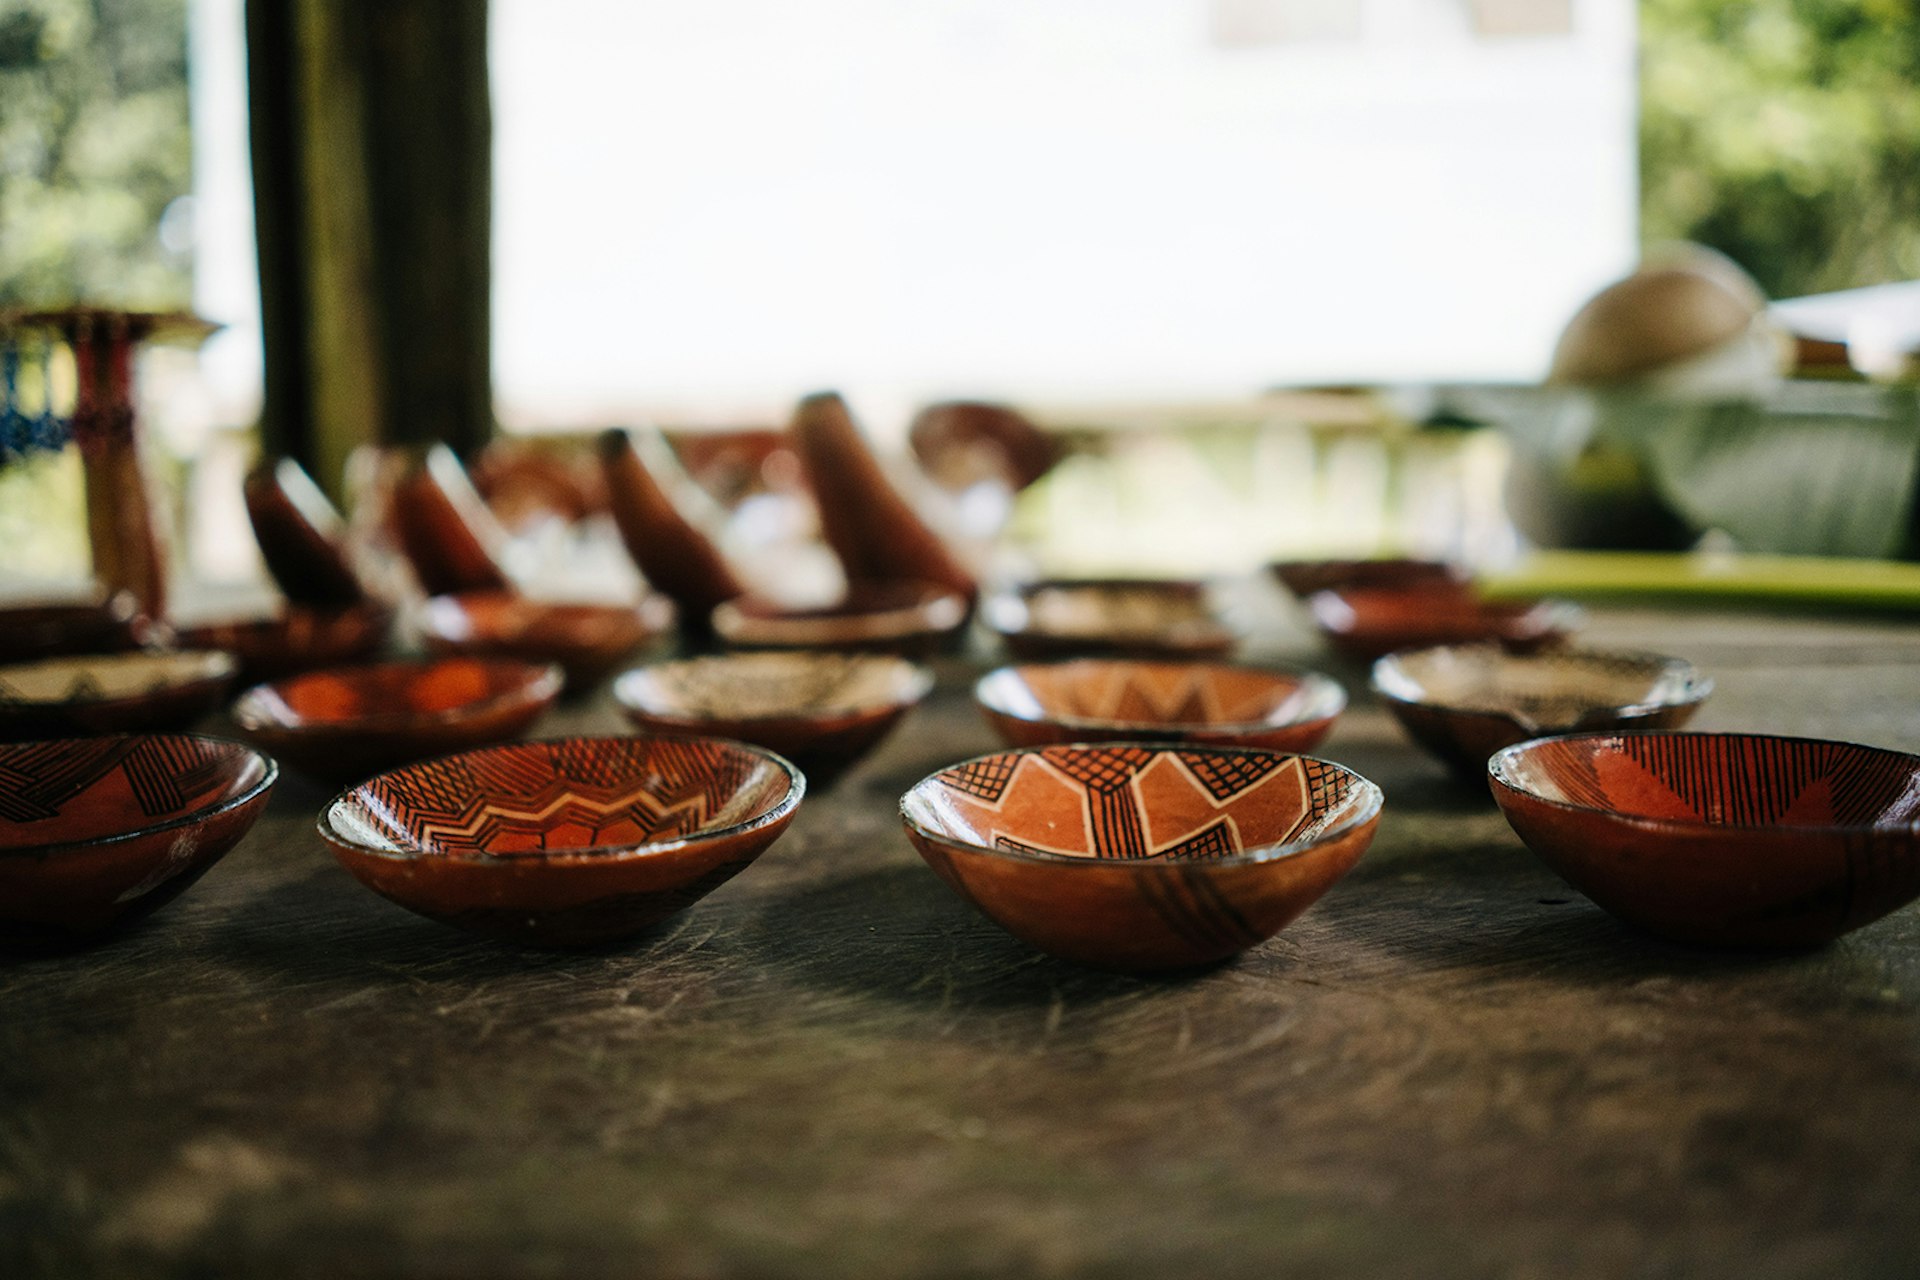 A close up of shallow clay bowls with indigenous designs painted on them